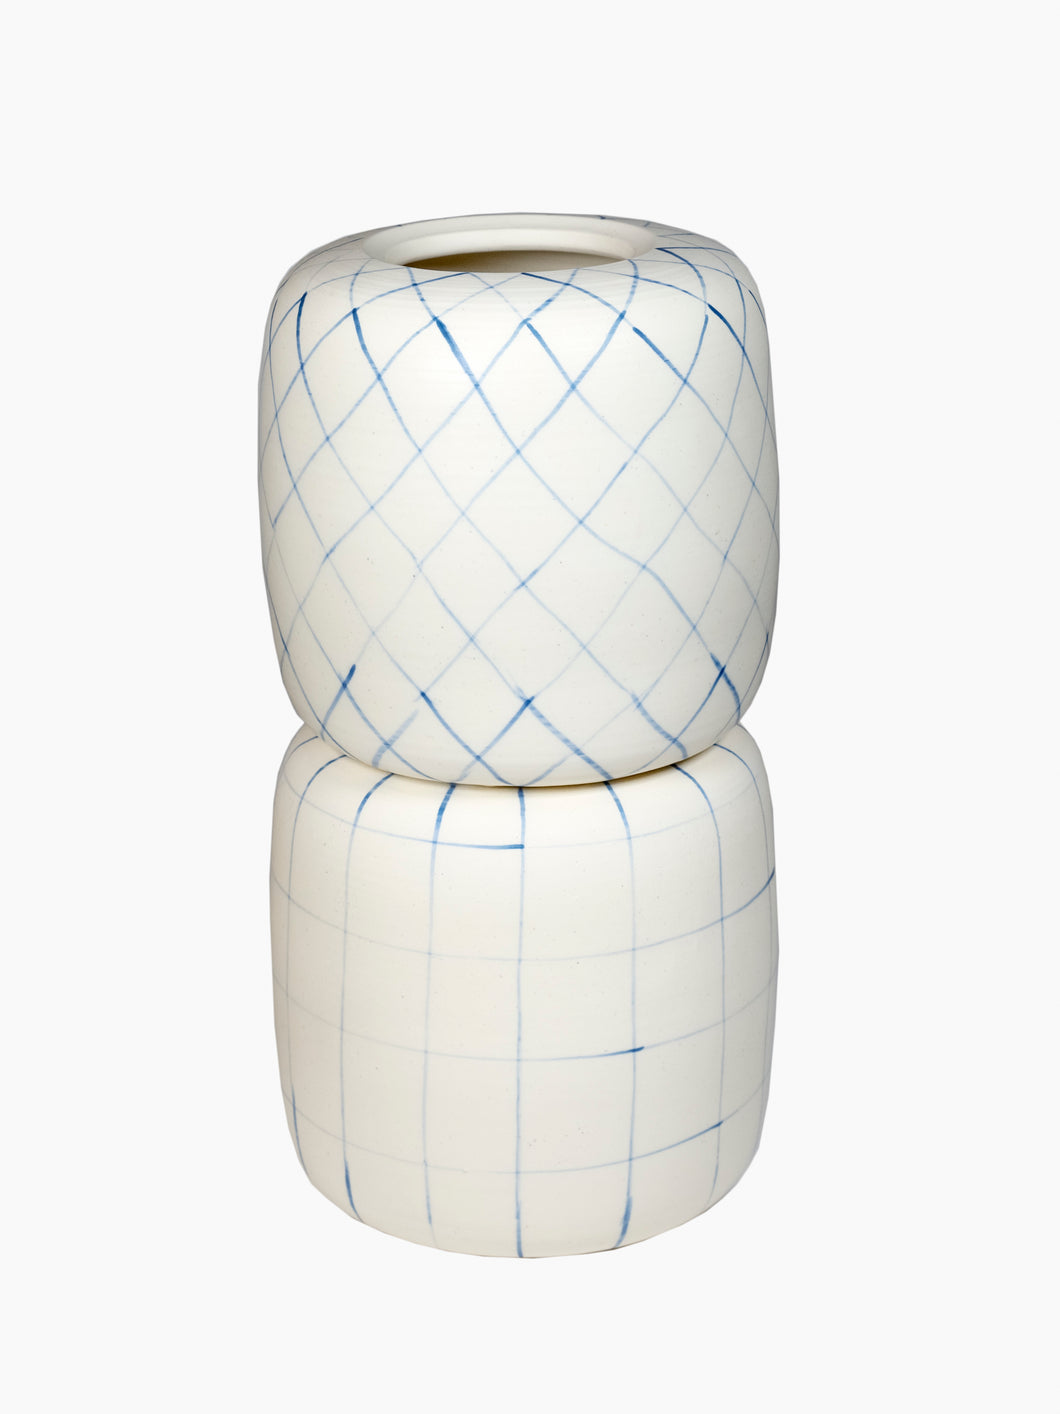 Blue and White Stacked Vase